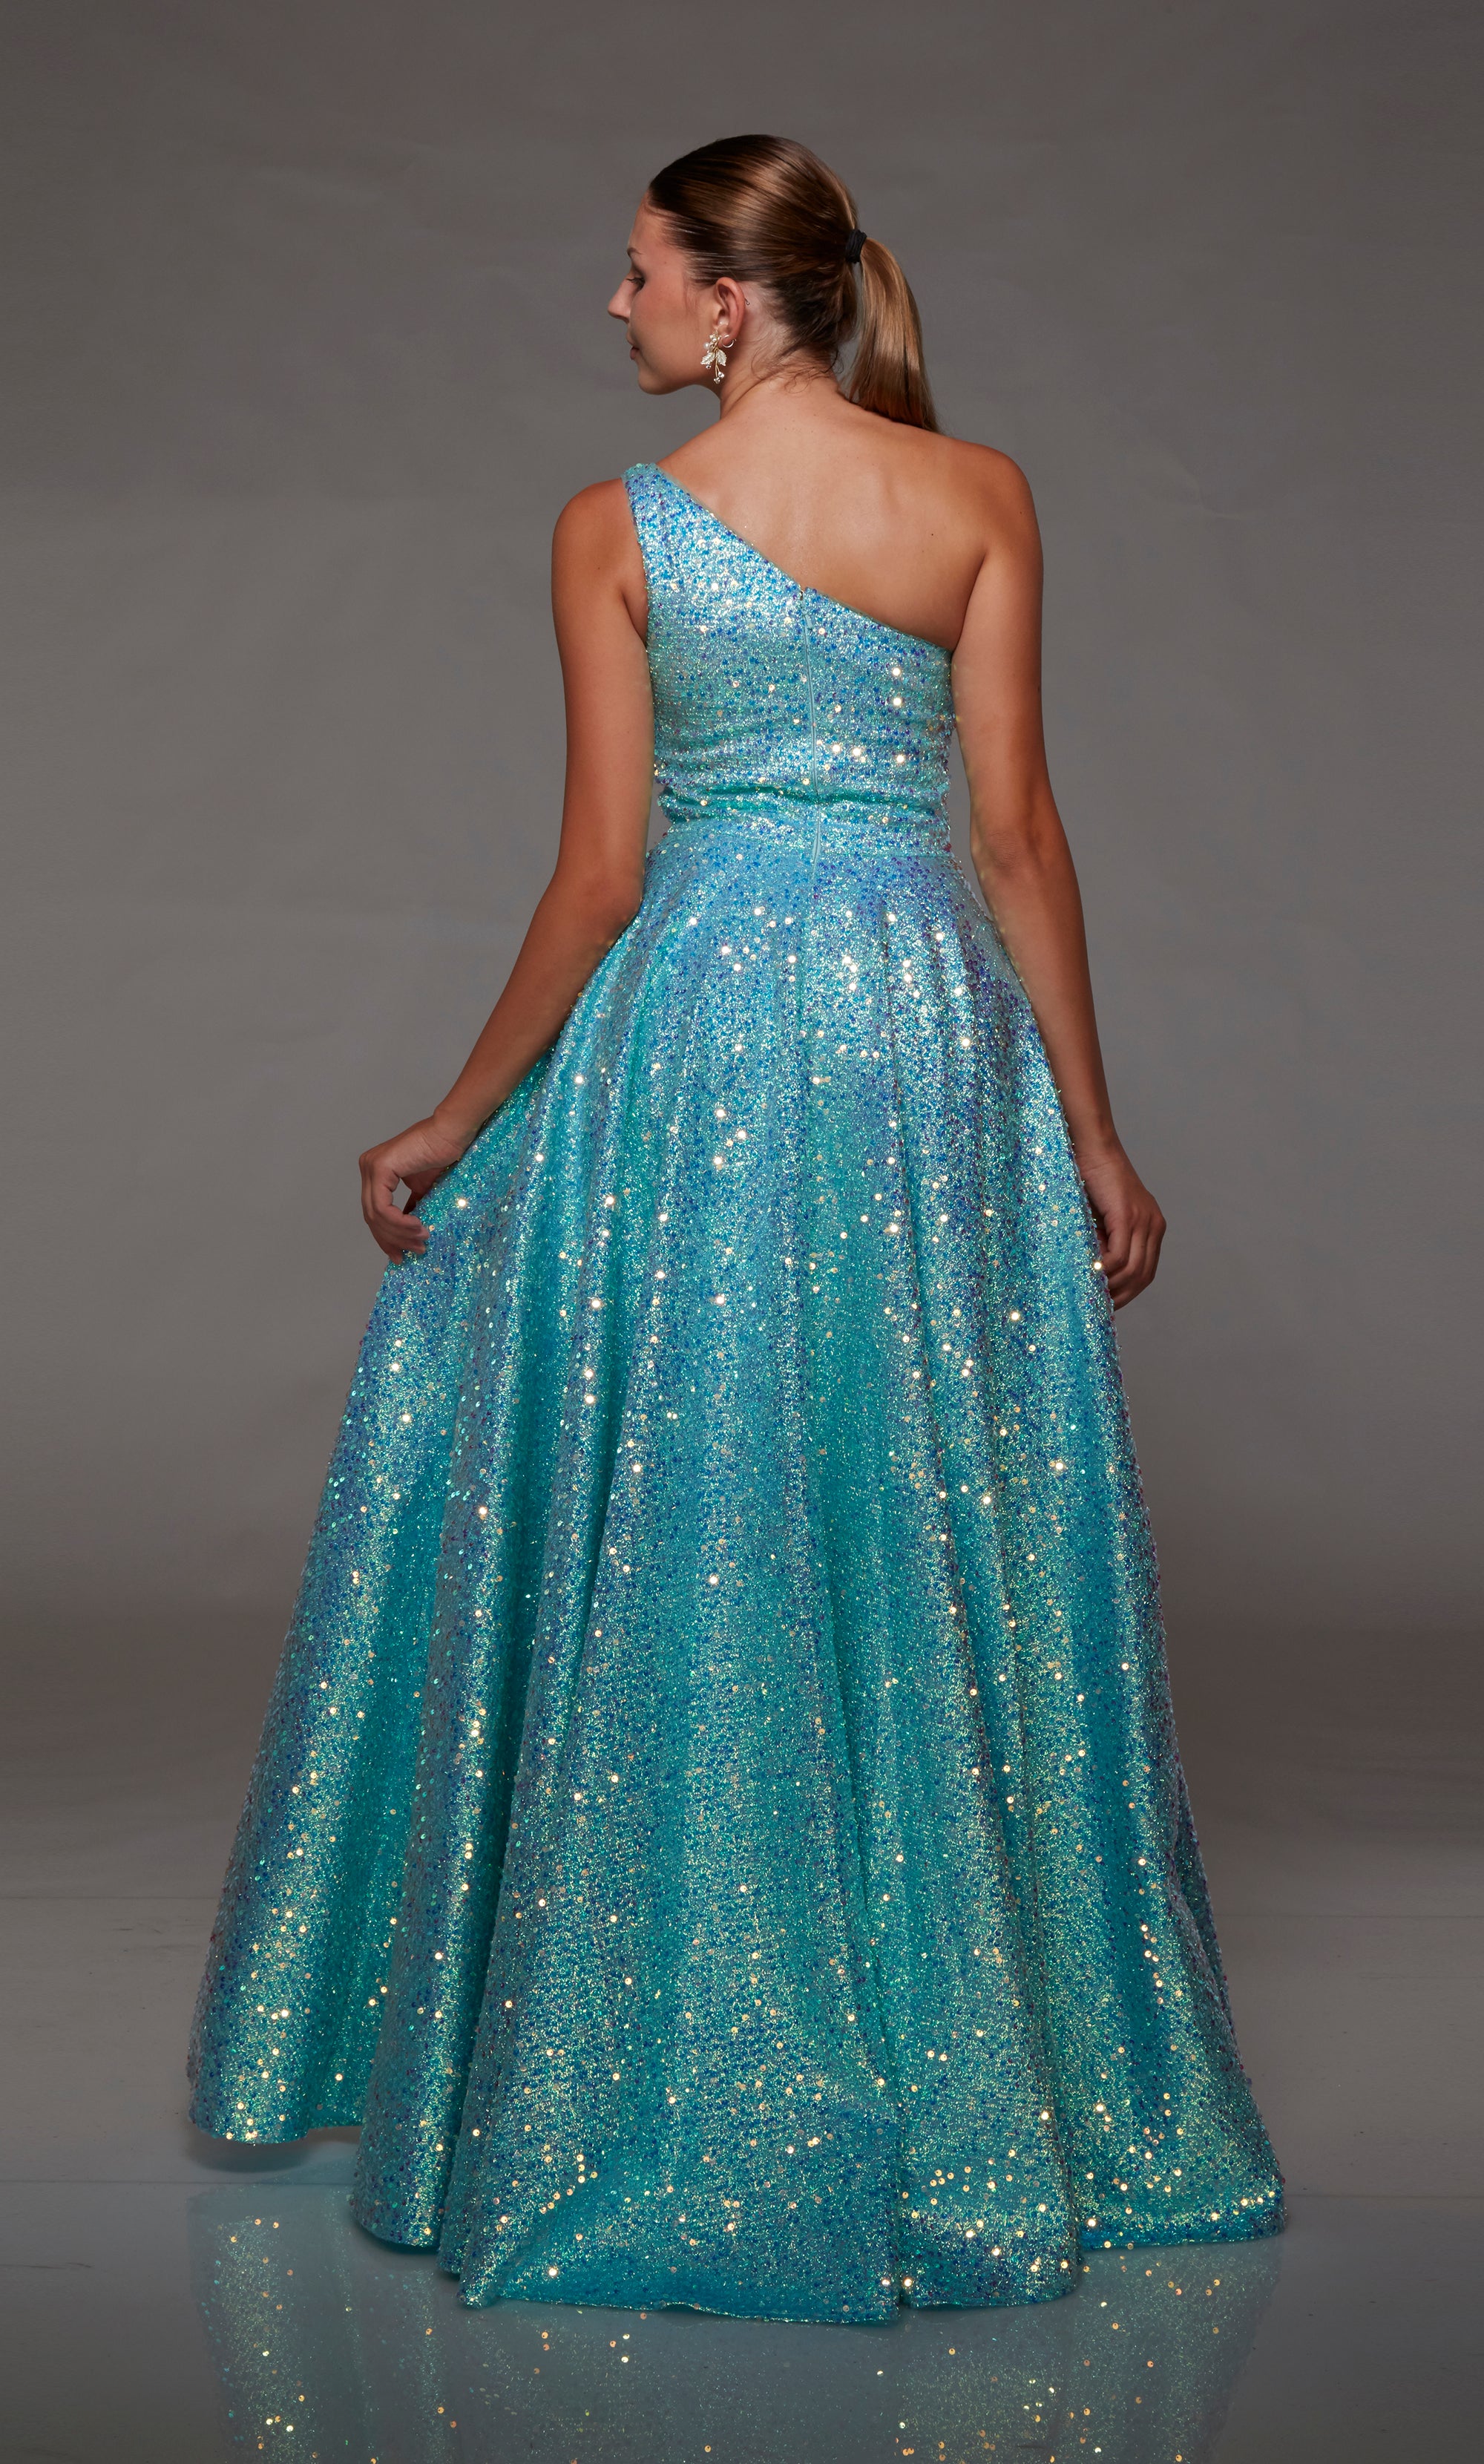 Elegant light blue one-shoulder gown: High slit, zip-up back, and an slight train in sparkly iridescent sequin fabrication for an glamorous and sophisticated look.